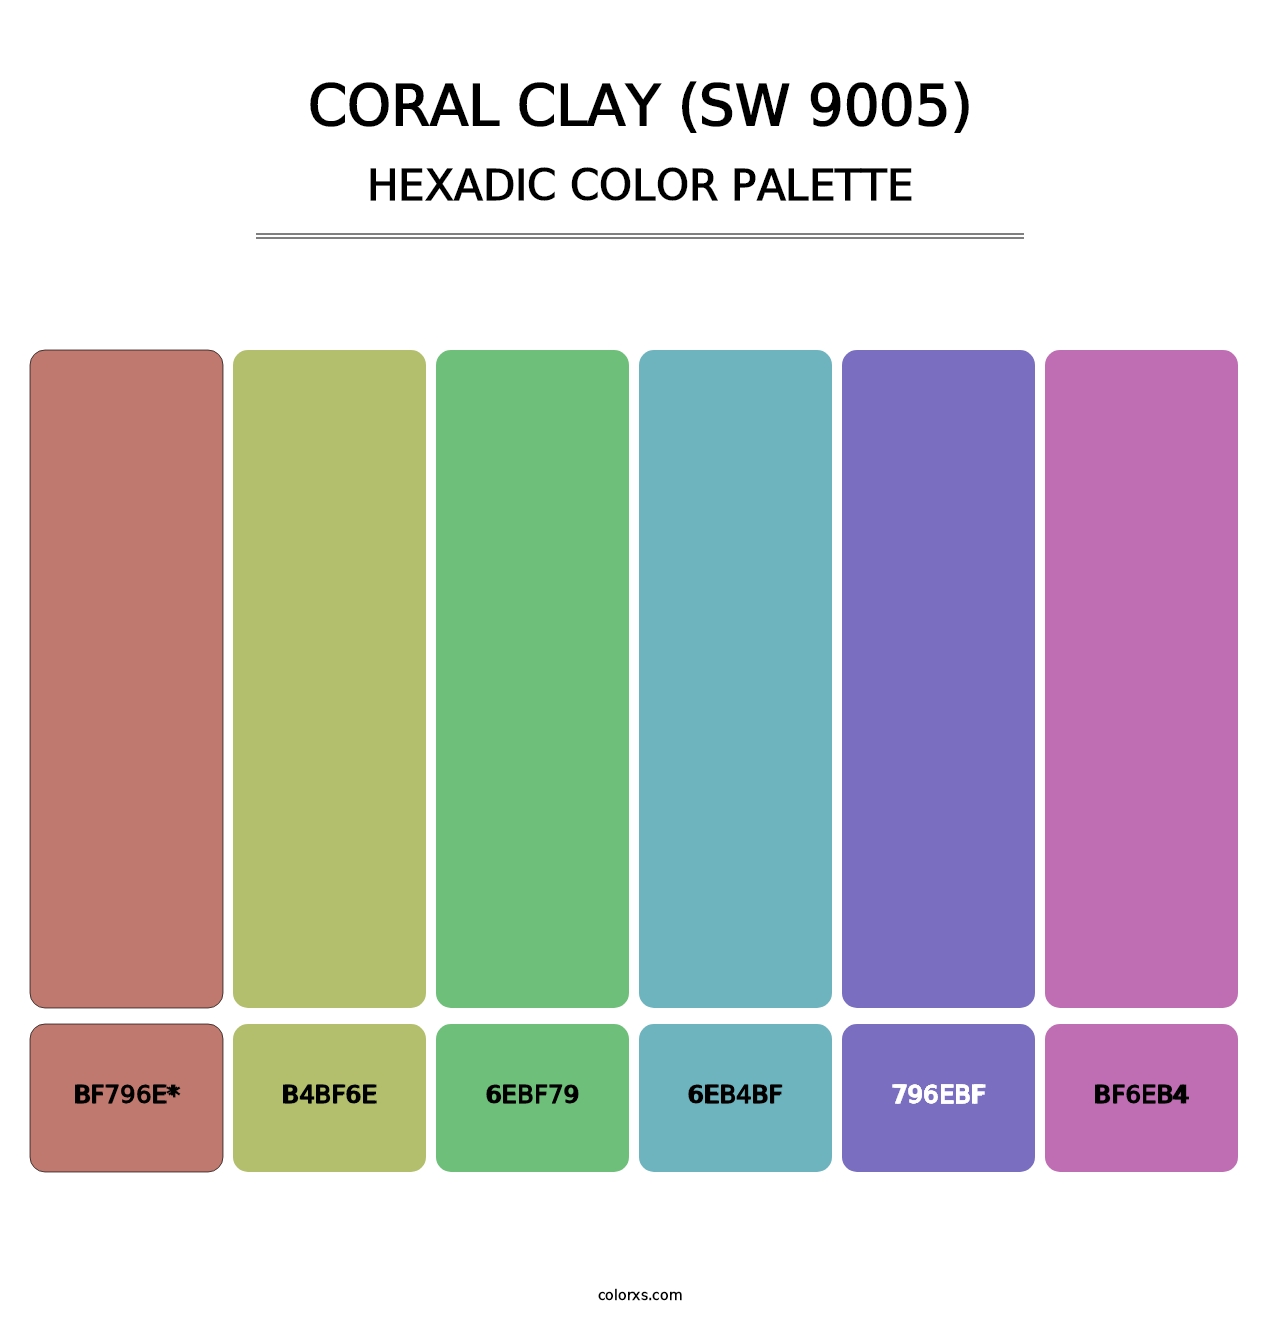 Coral Clay (SW 9005) - Hexadic Color Palette